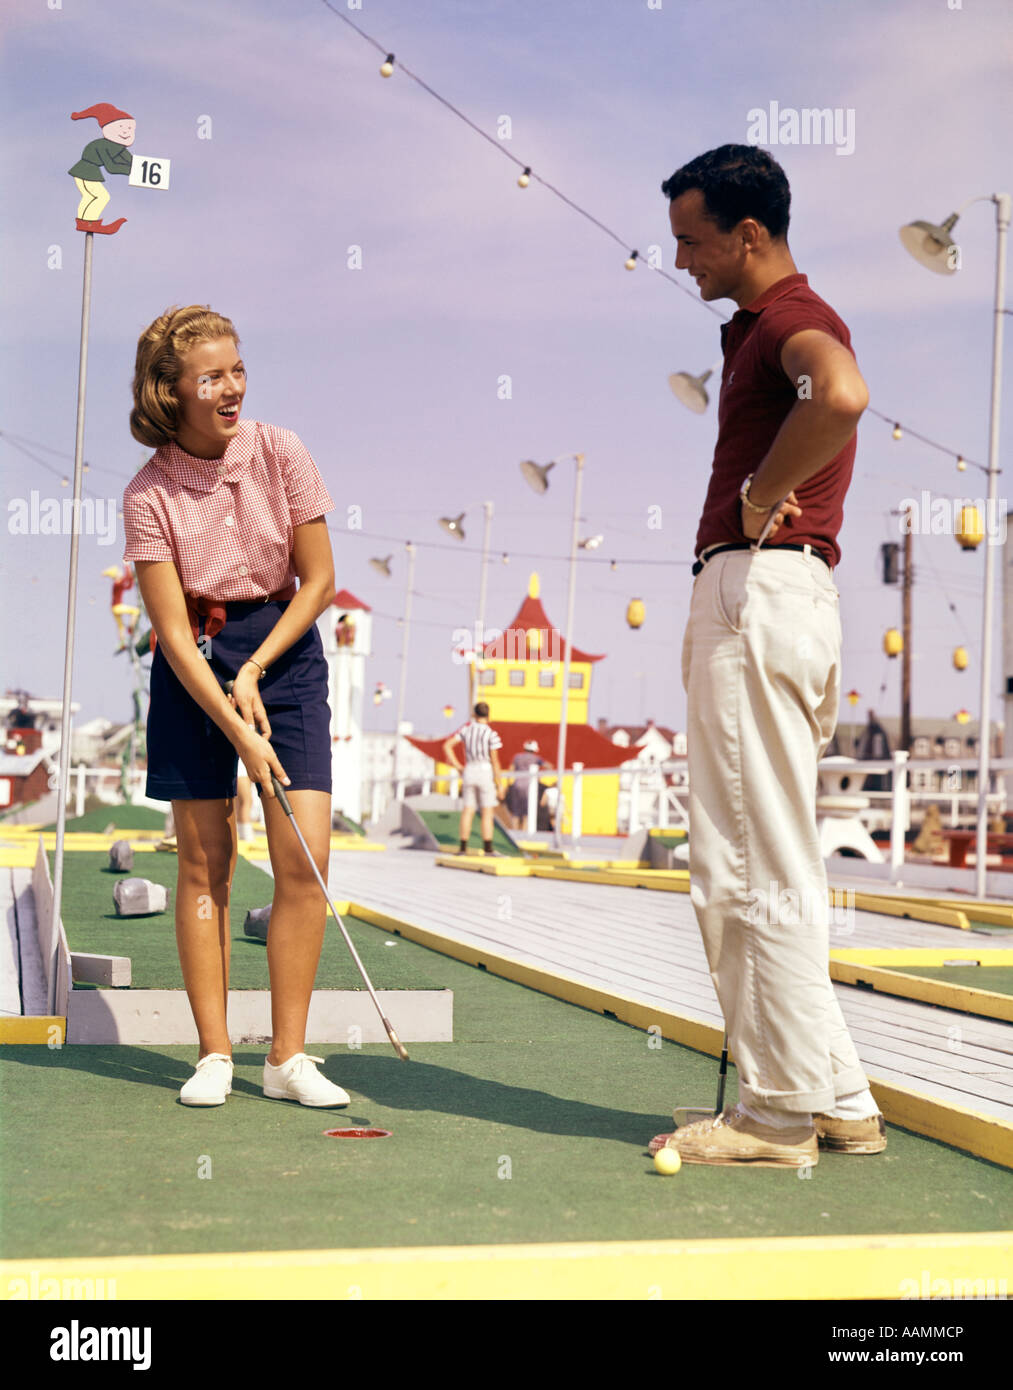 1960s YOUNG COUPLE PLUING MINIATURE GOLF Stock Photo